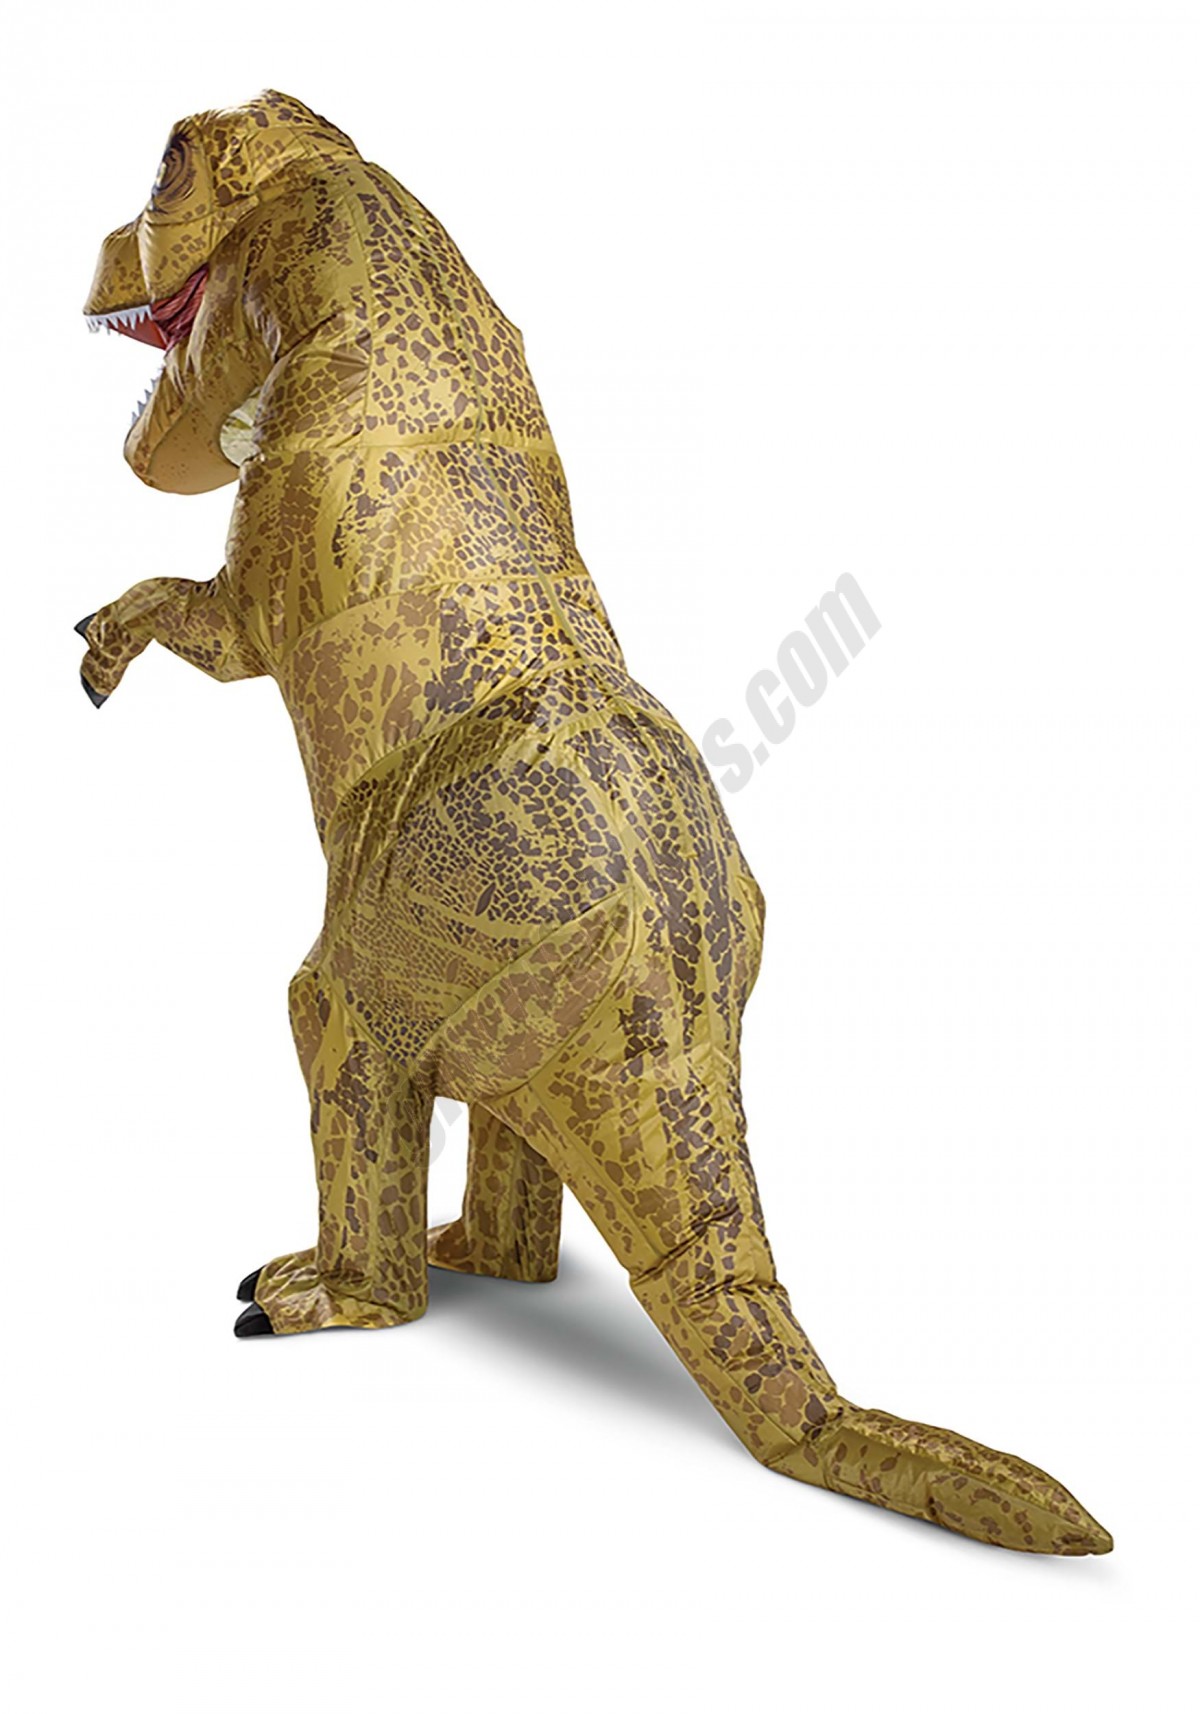 Jurassic World Inflatable T-Rex Costume for Adults - Men's - -1